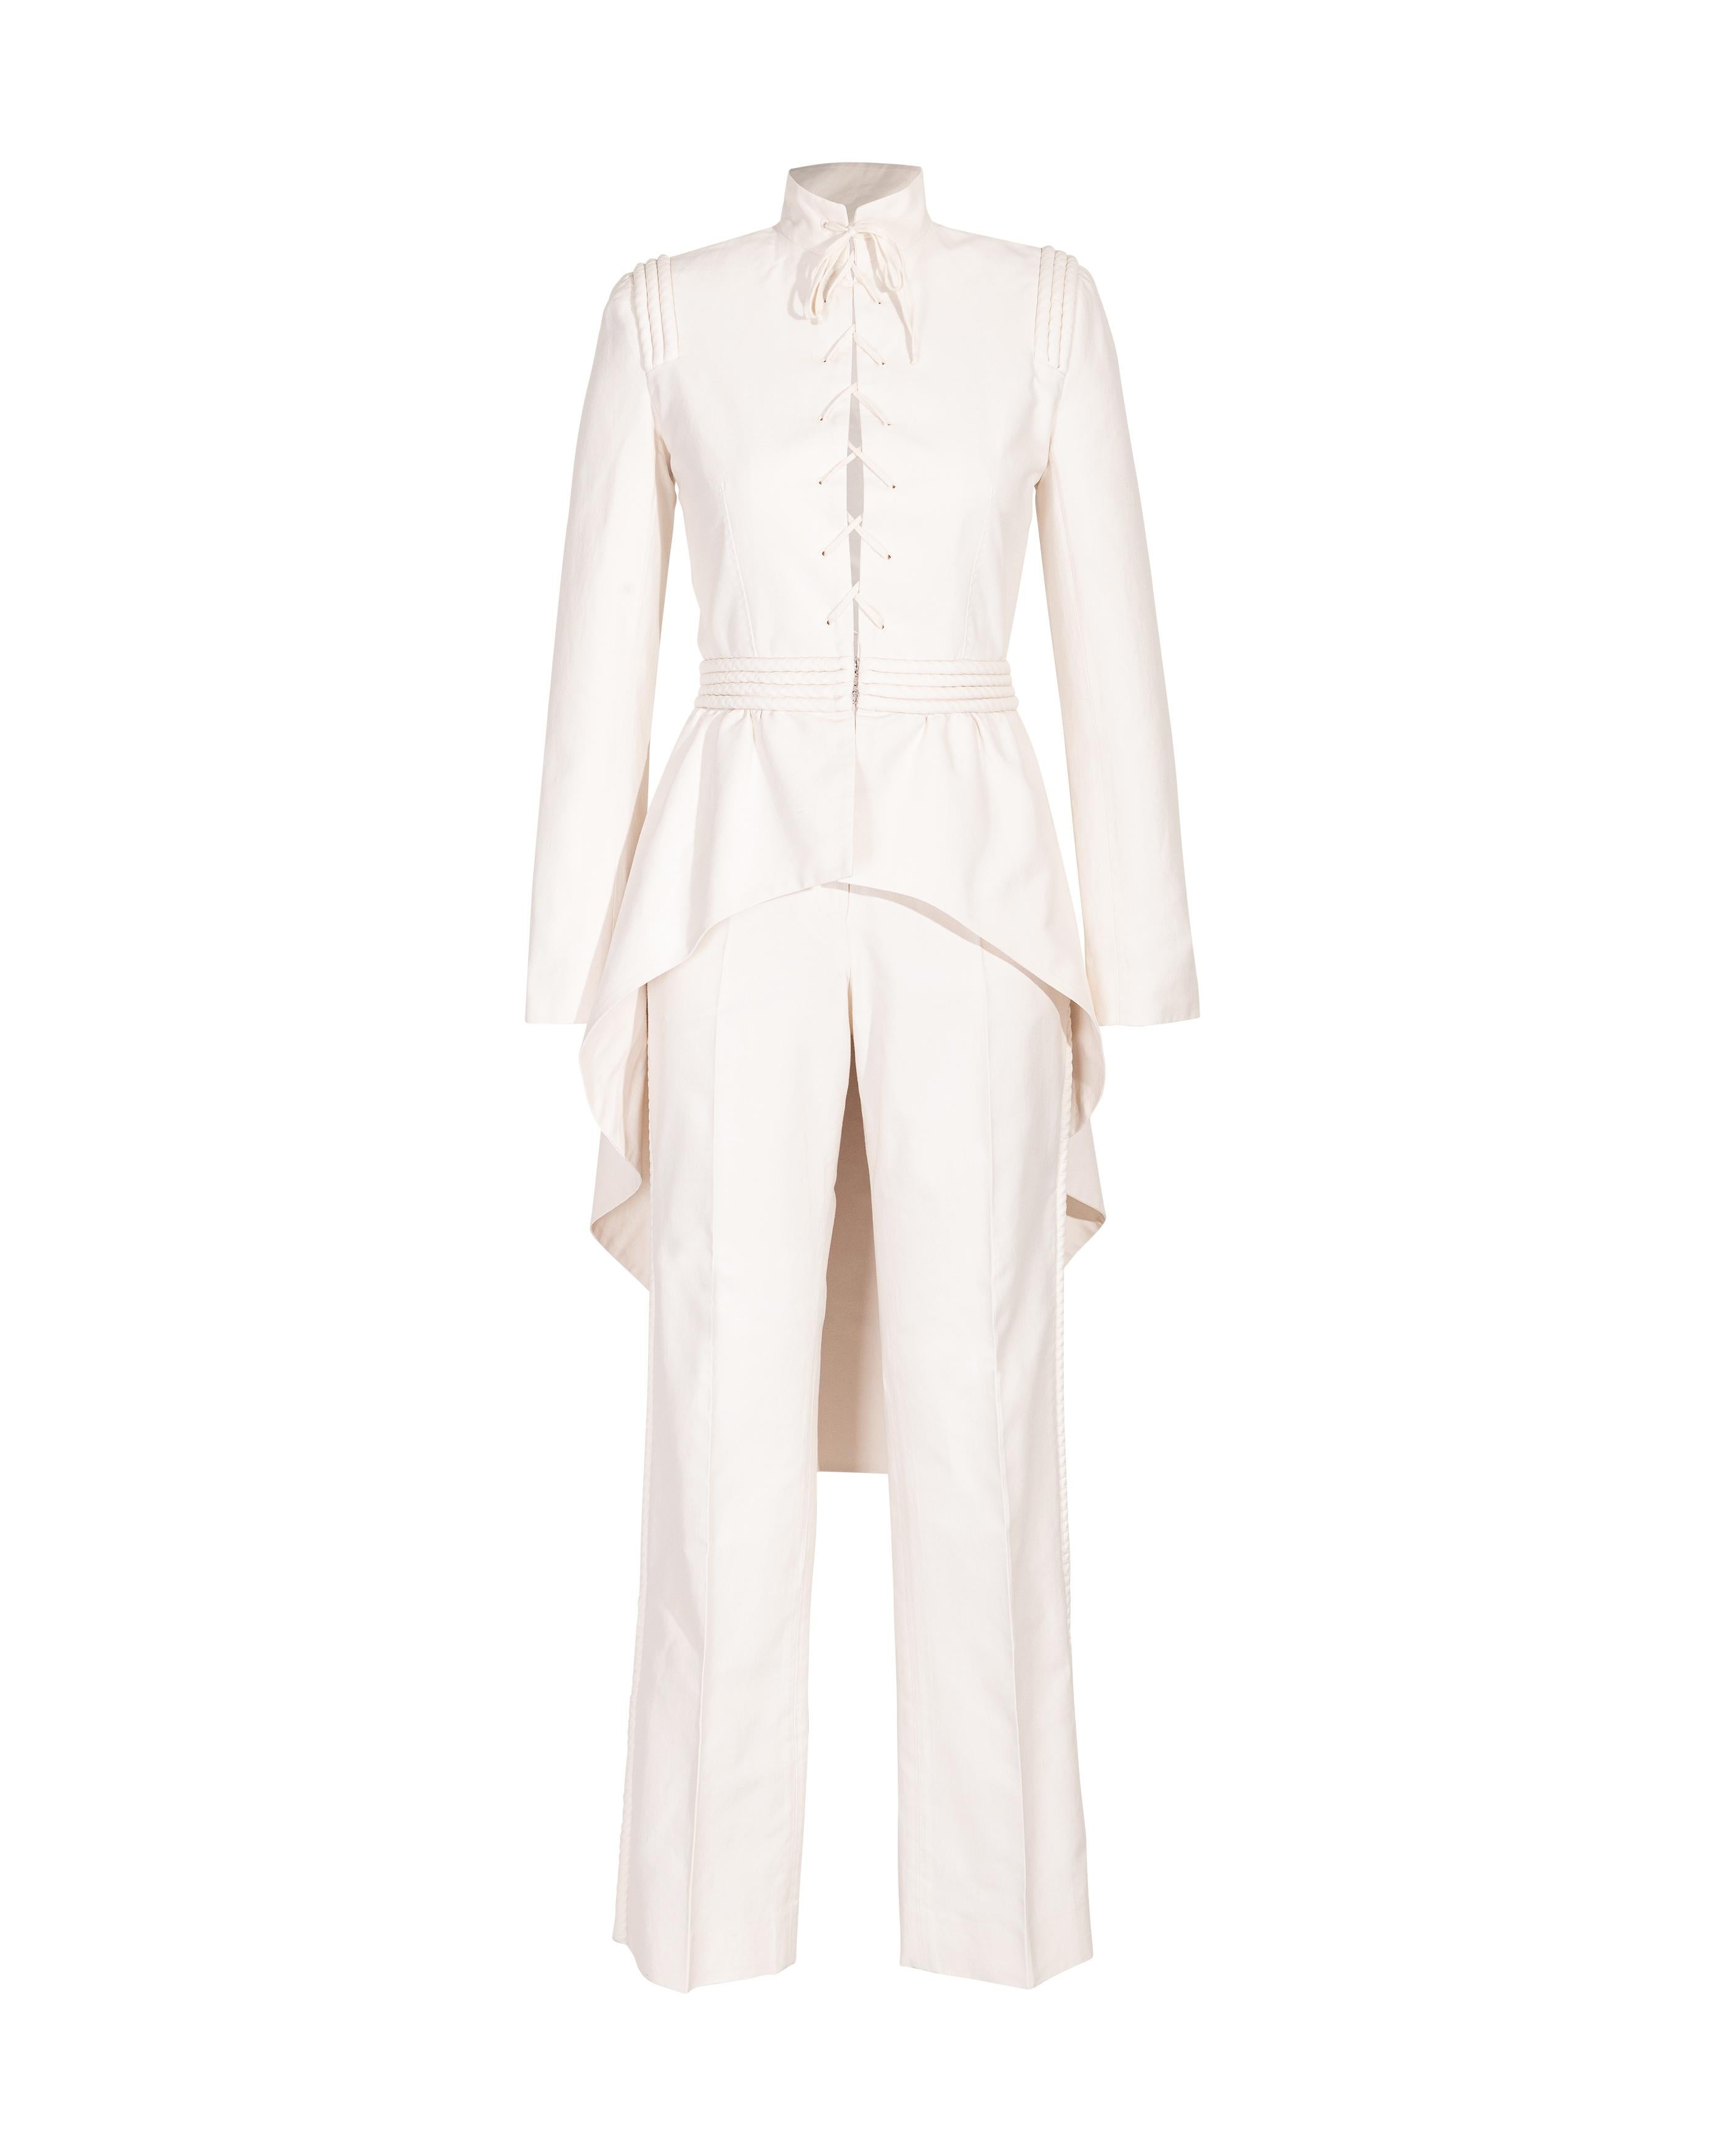 S/S 2002 Givenchy Cotton Cream High-Low Jacket and Pant Set 10